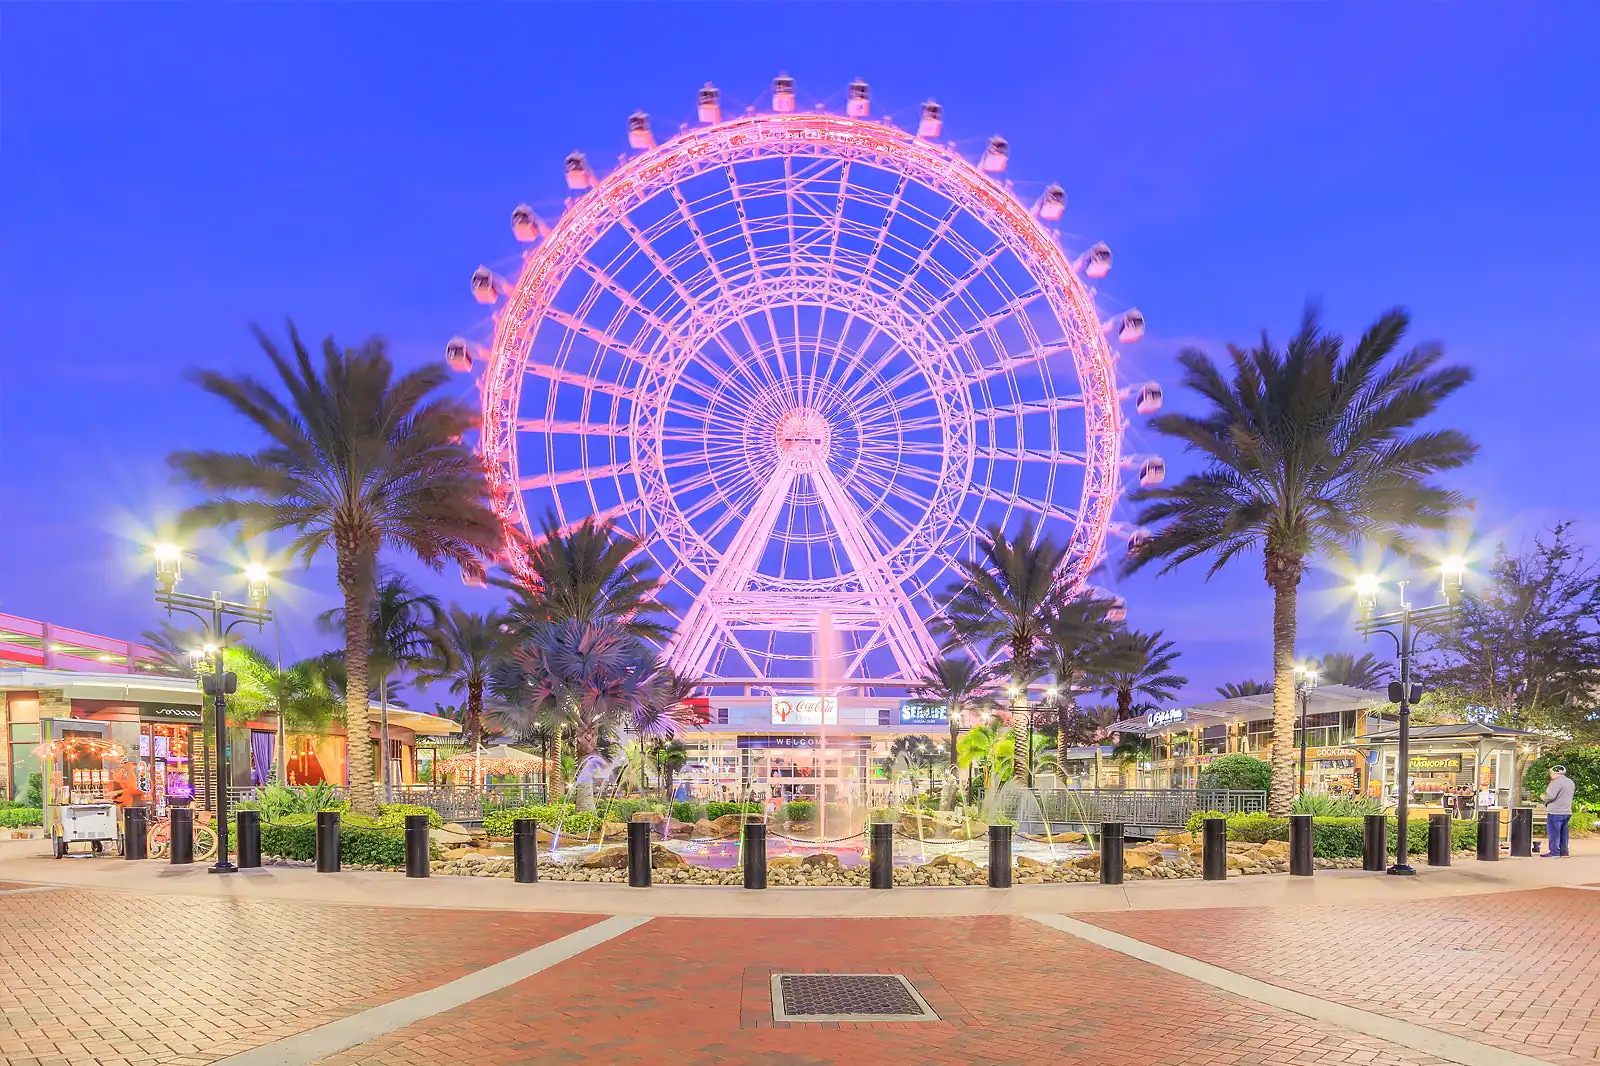 99 Things for Kids to Do This Summer in Orlando, Florida, Besides the Major Theme Parks